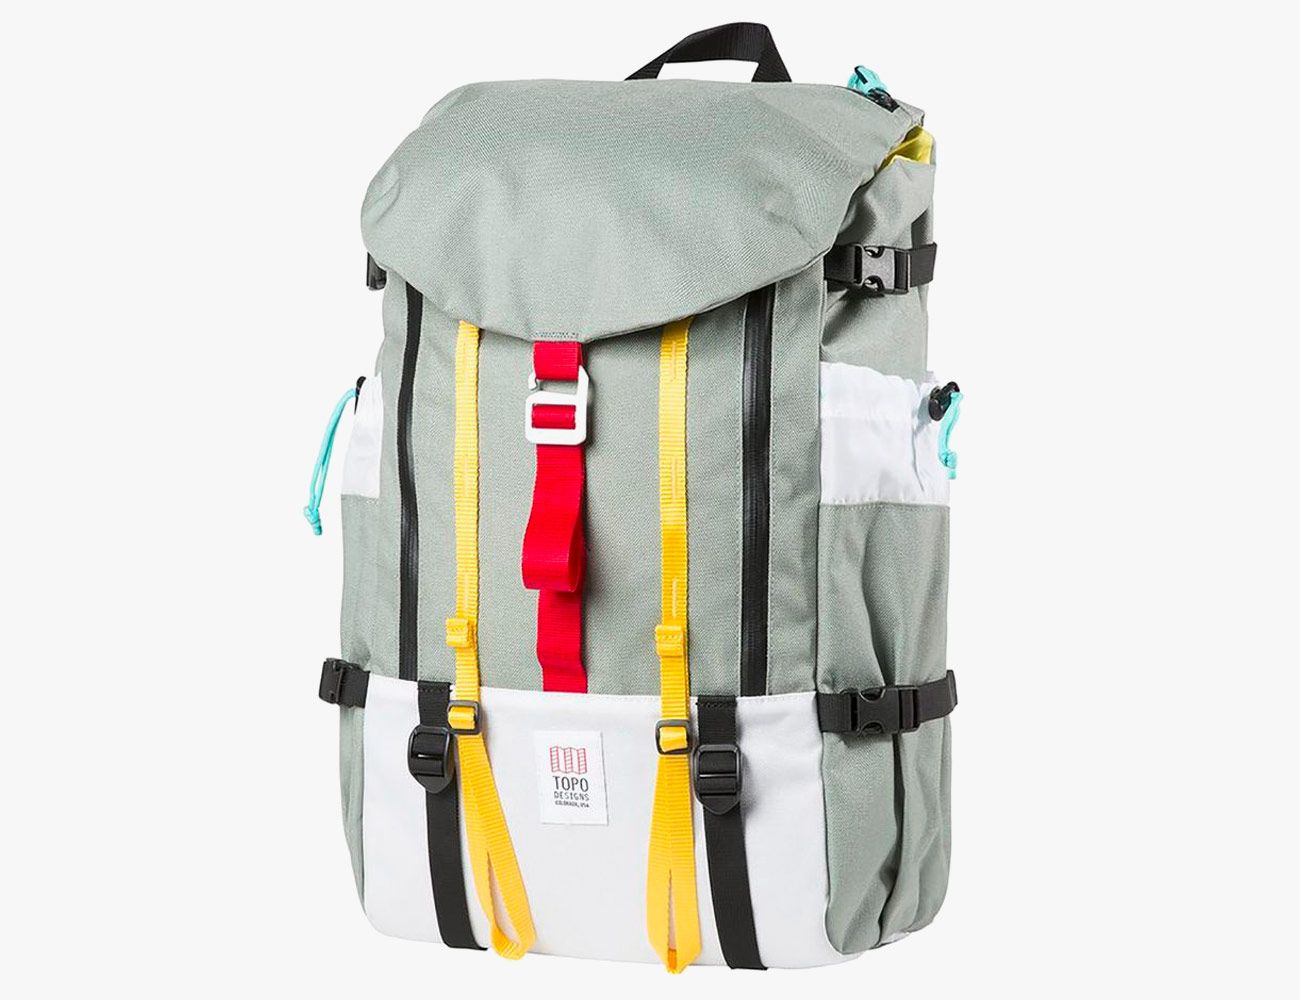 hydration daypacks for hiking